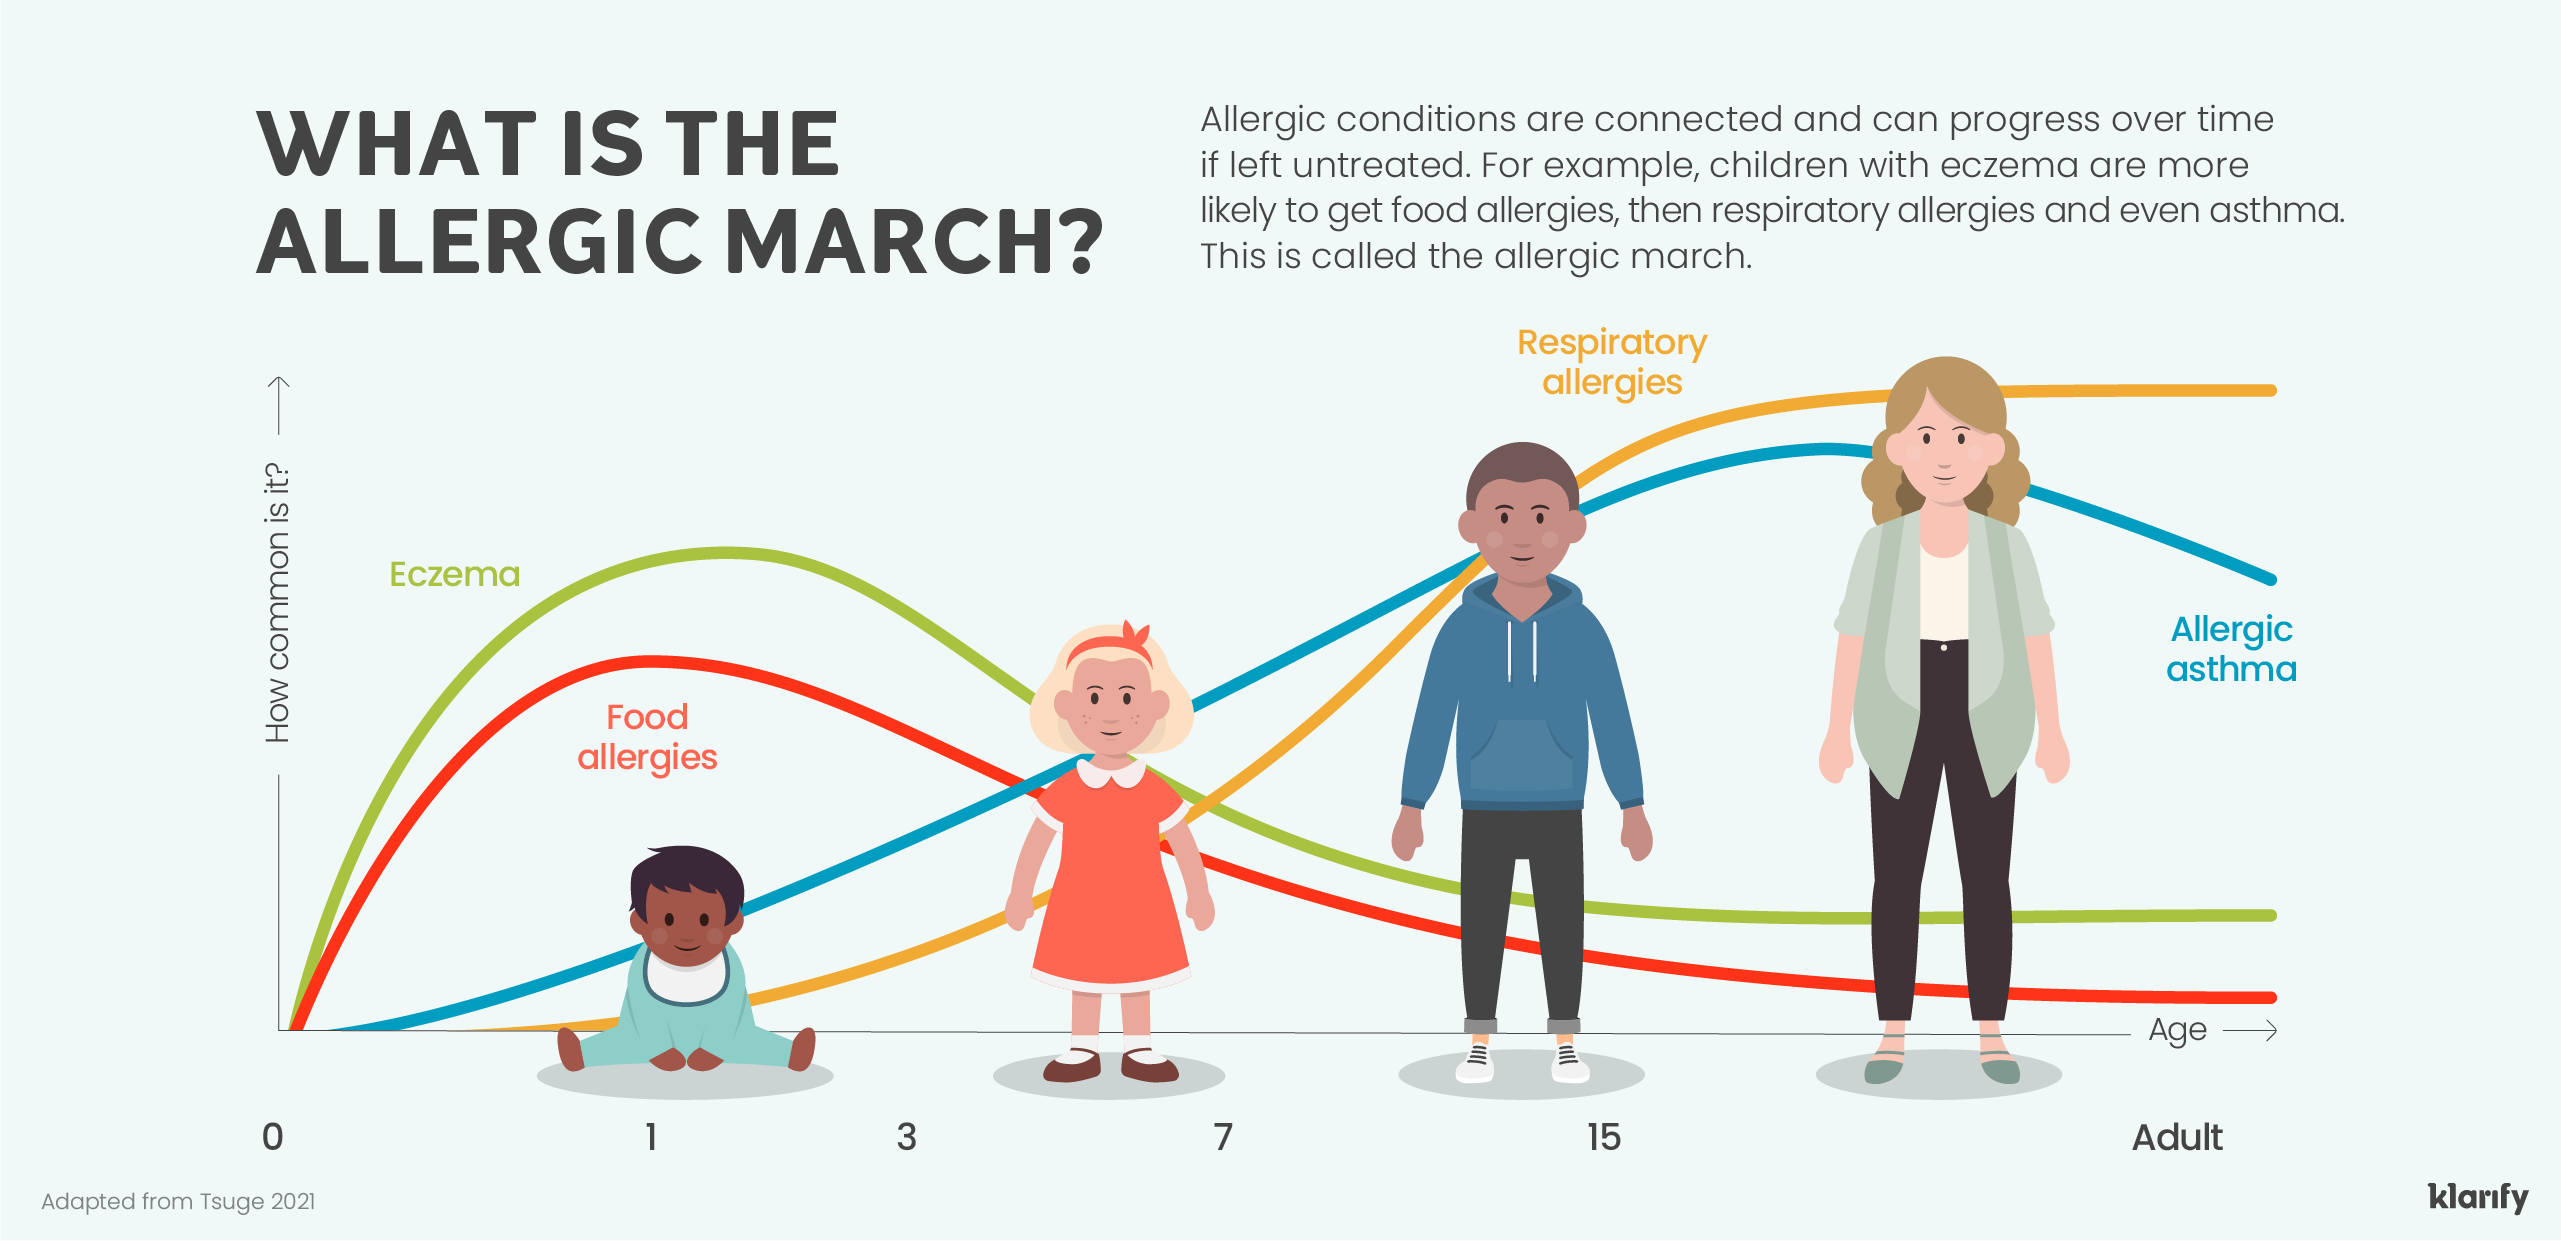 Infographic about the allergic march, which describes how allergic conditions are connected and can progress over time if left untreated. For example, children with eczema are more likely to get food allergies, then respiratory allergies and even asthma. 